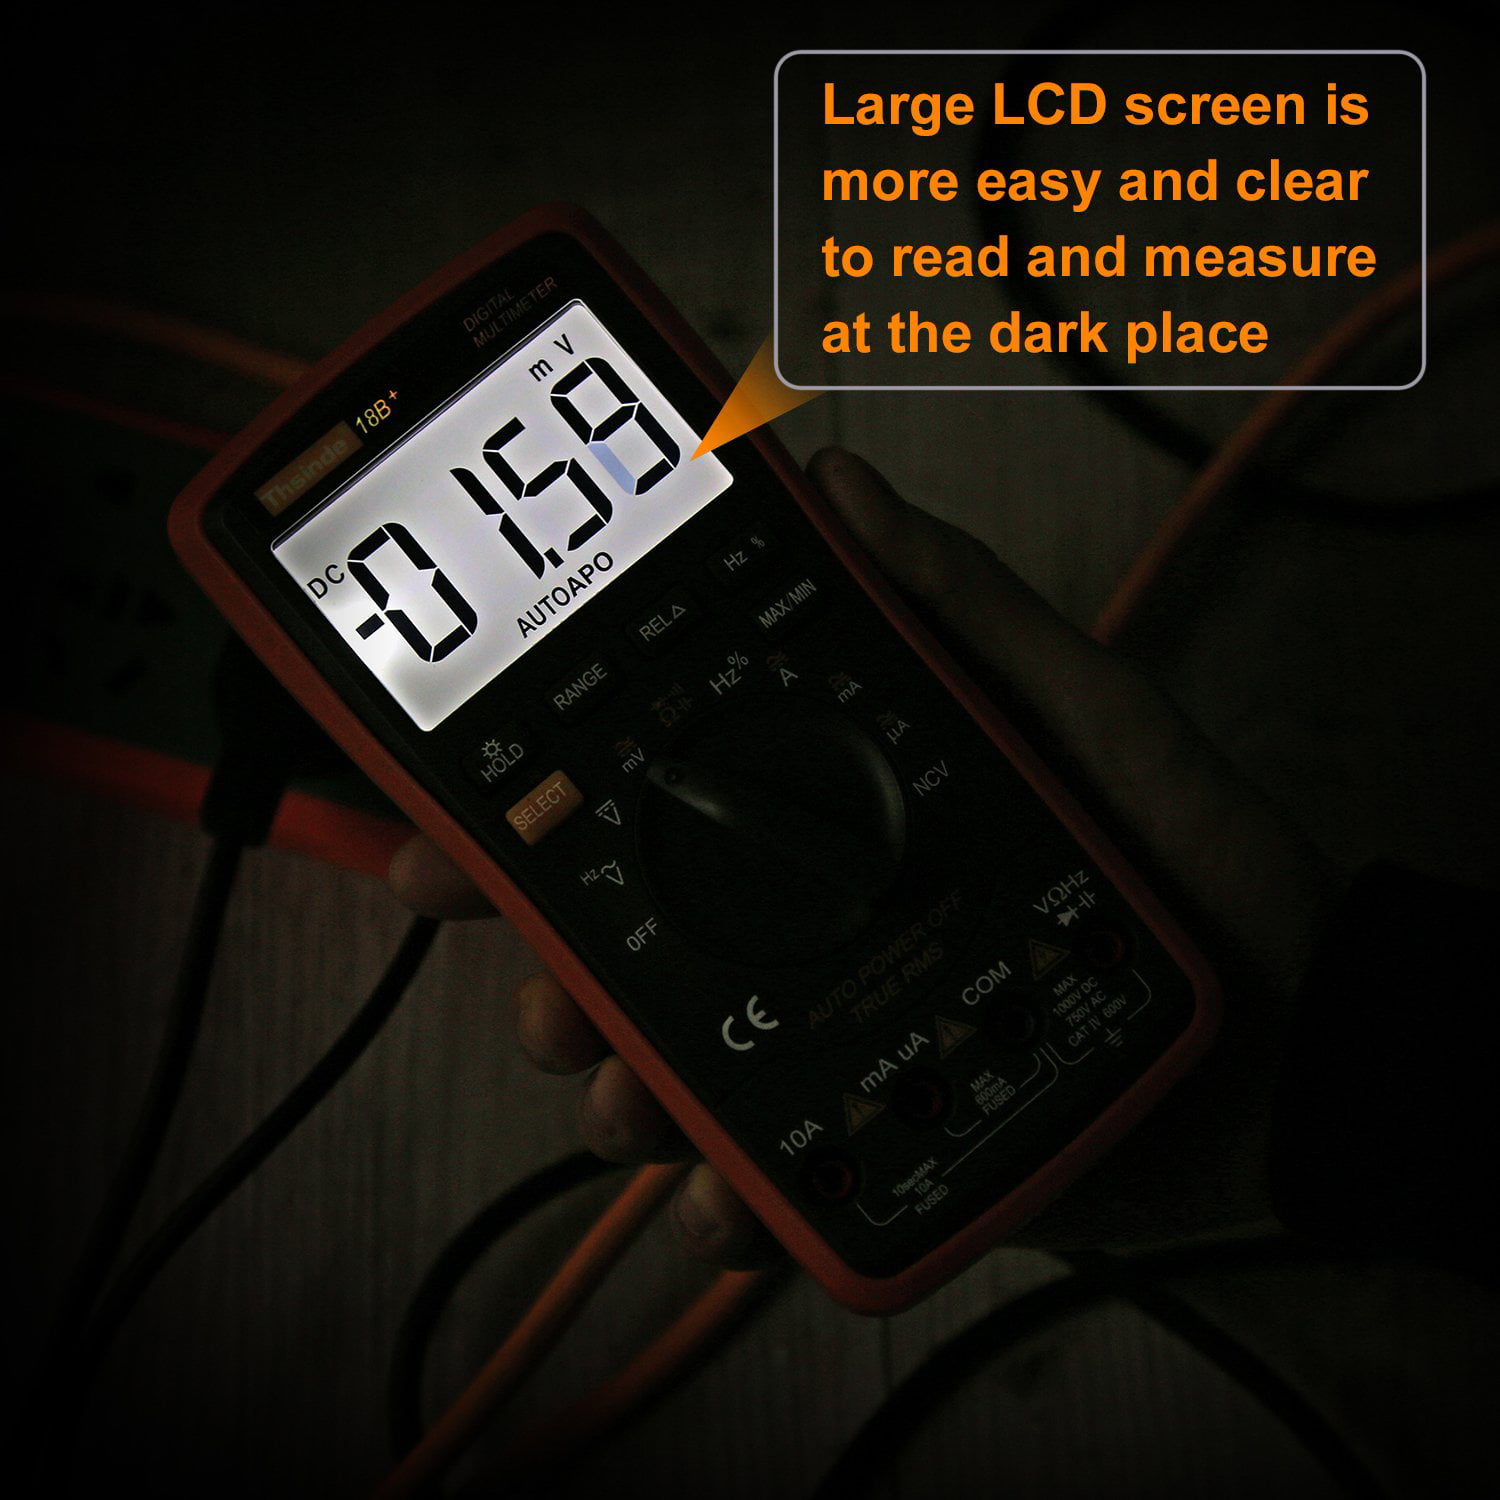 Auto Ranging Digital Multimeter TRMS 6000 with Battery Alligator Clips Test Lead 